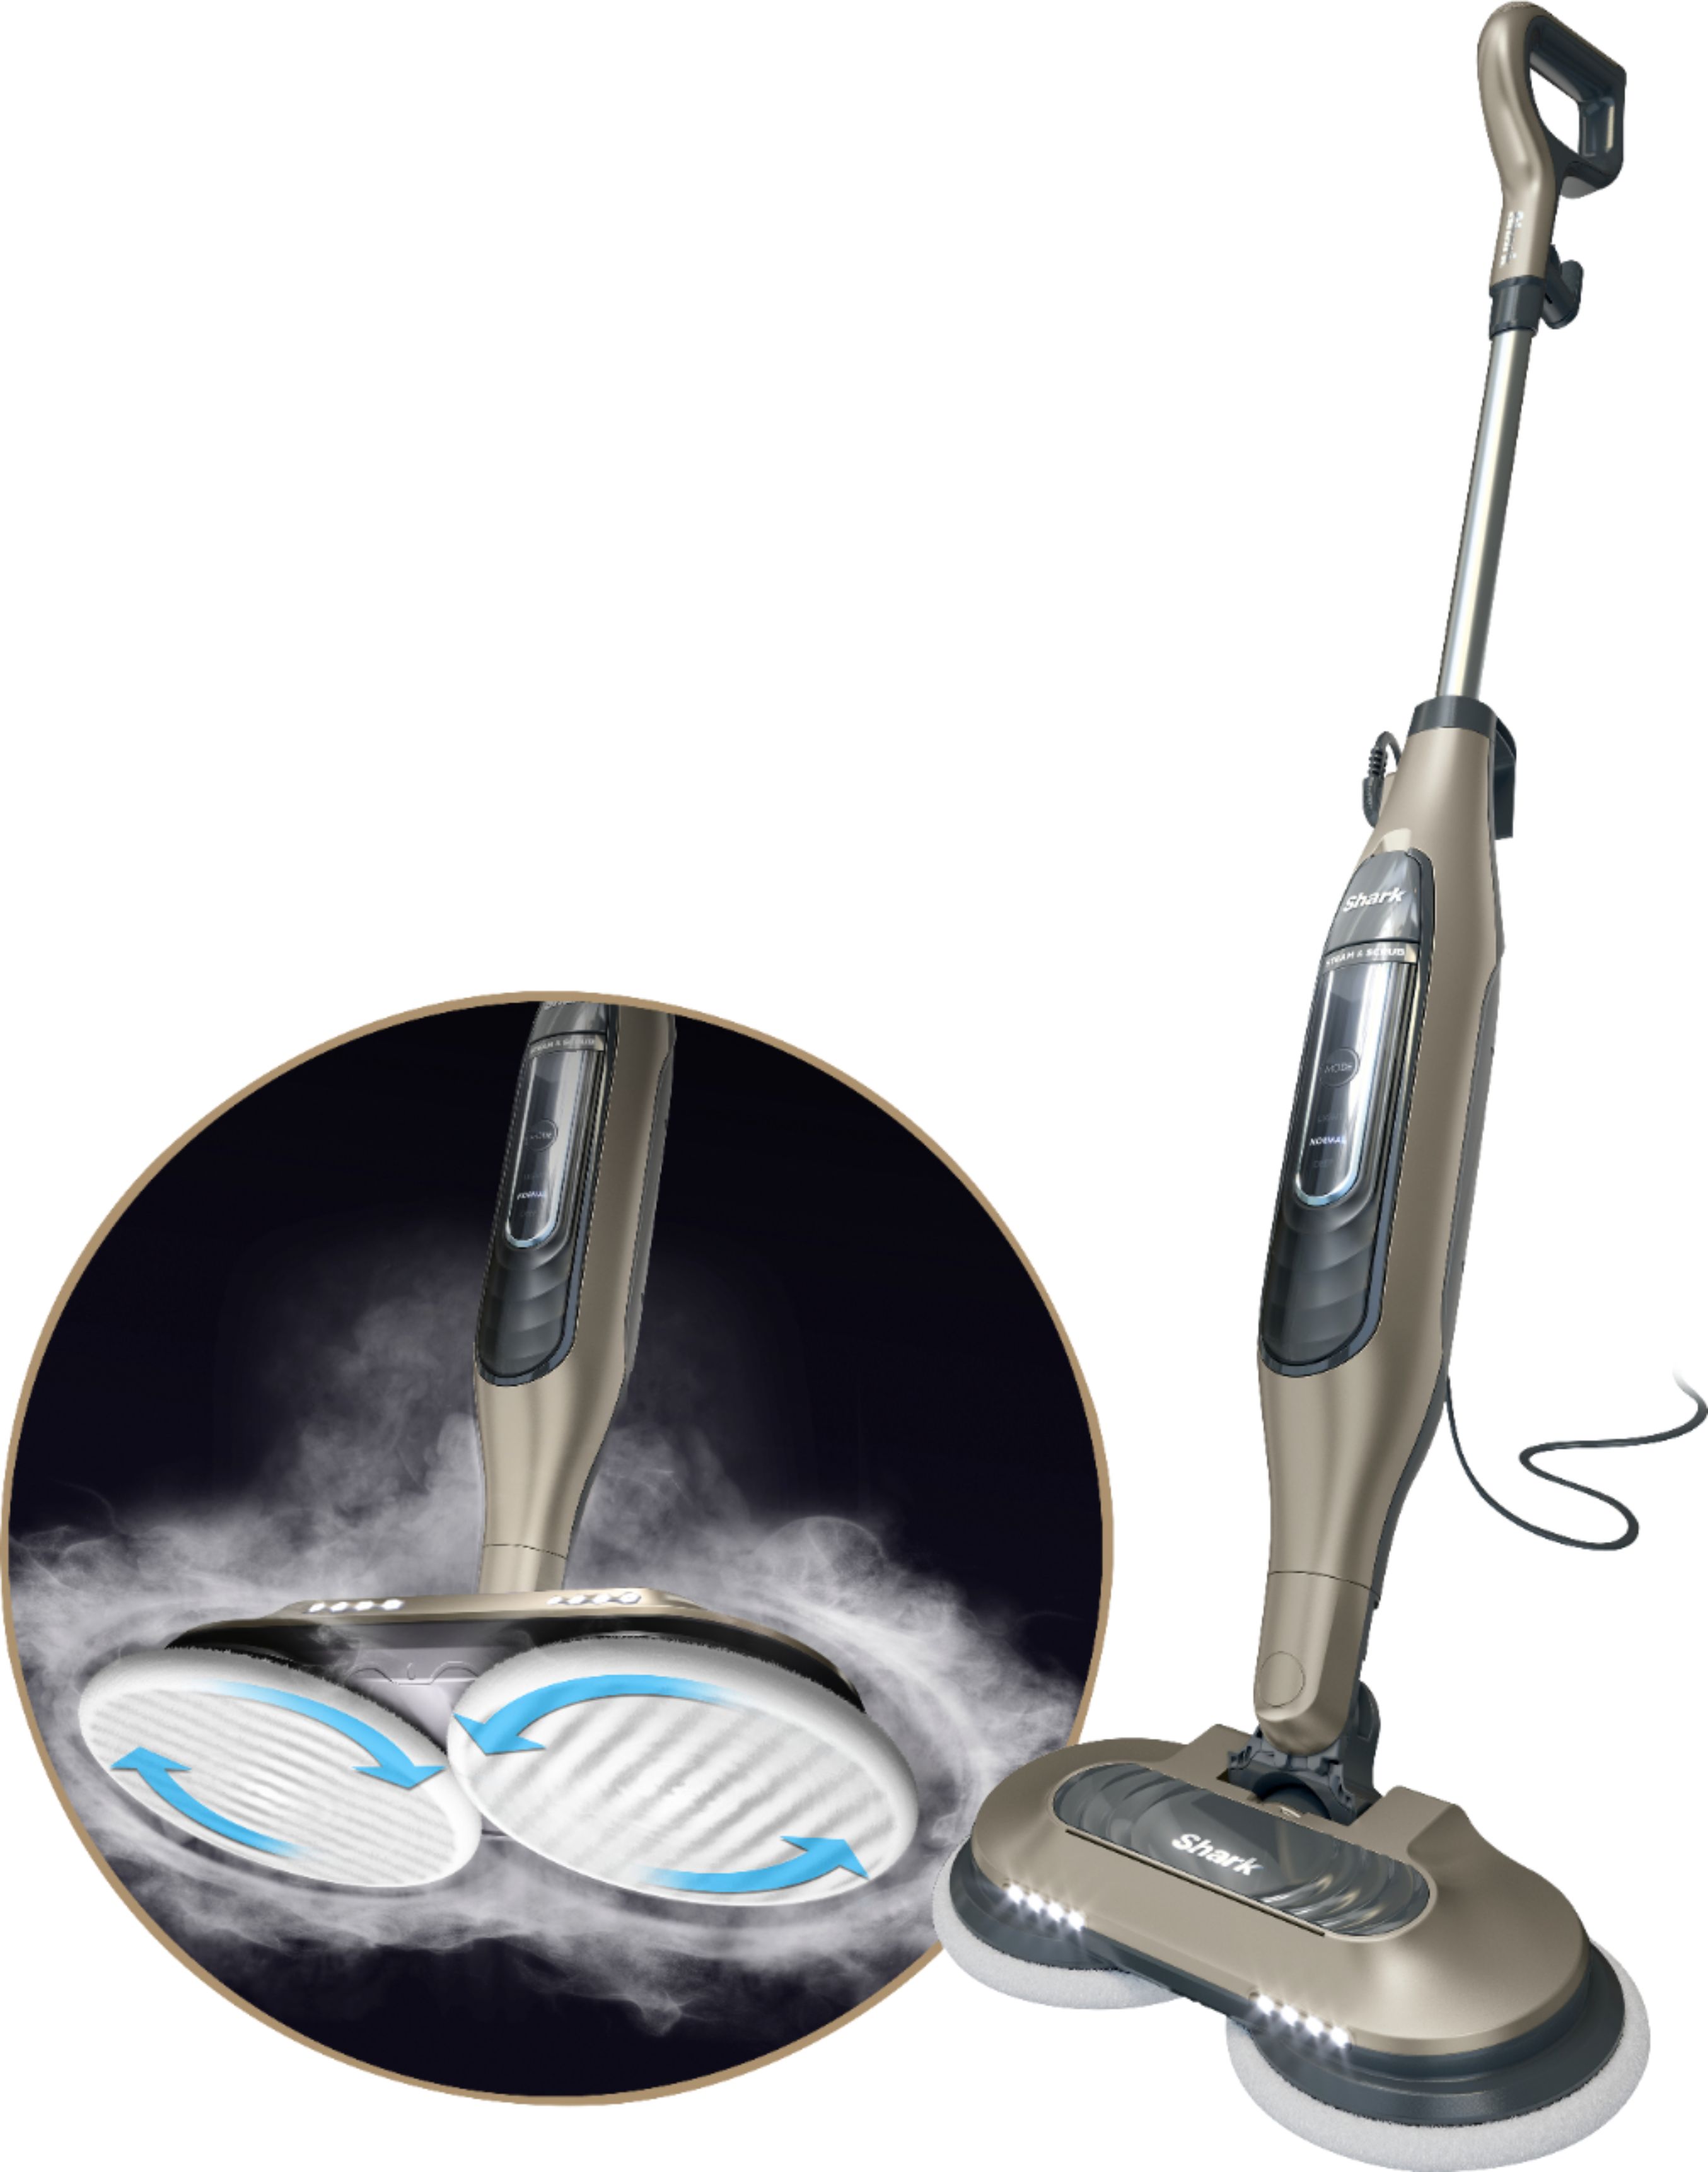 Shark Steam And Scrub All In One, Hardwood Floor Steamers Reviews